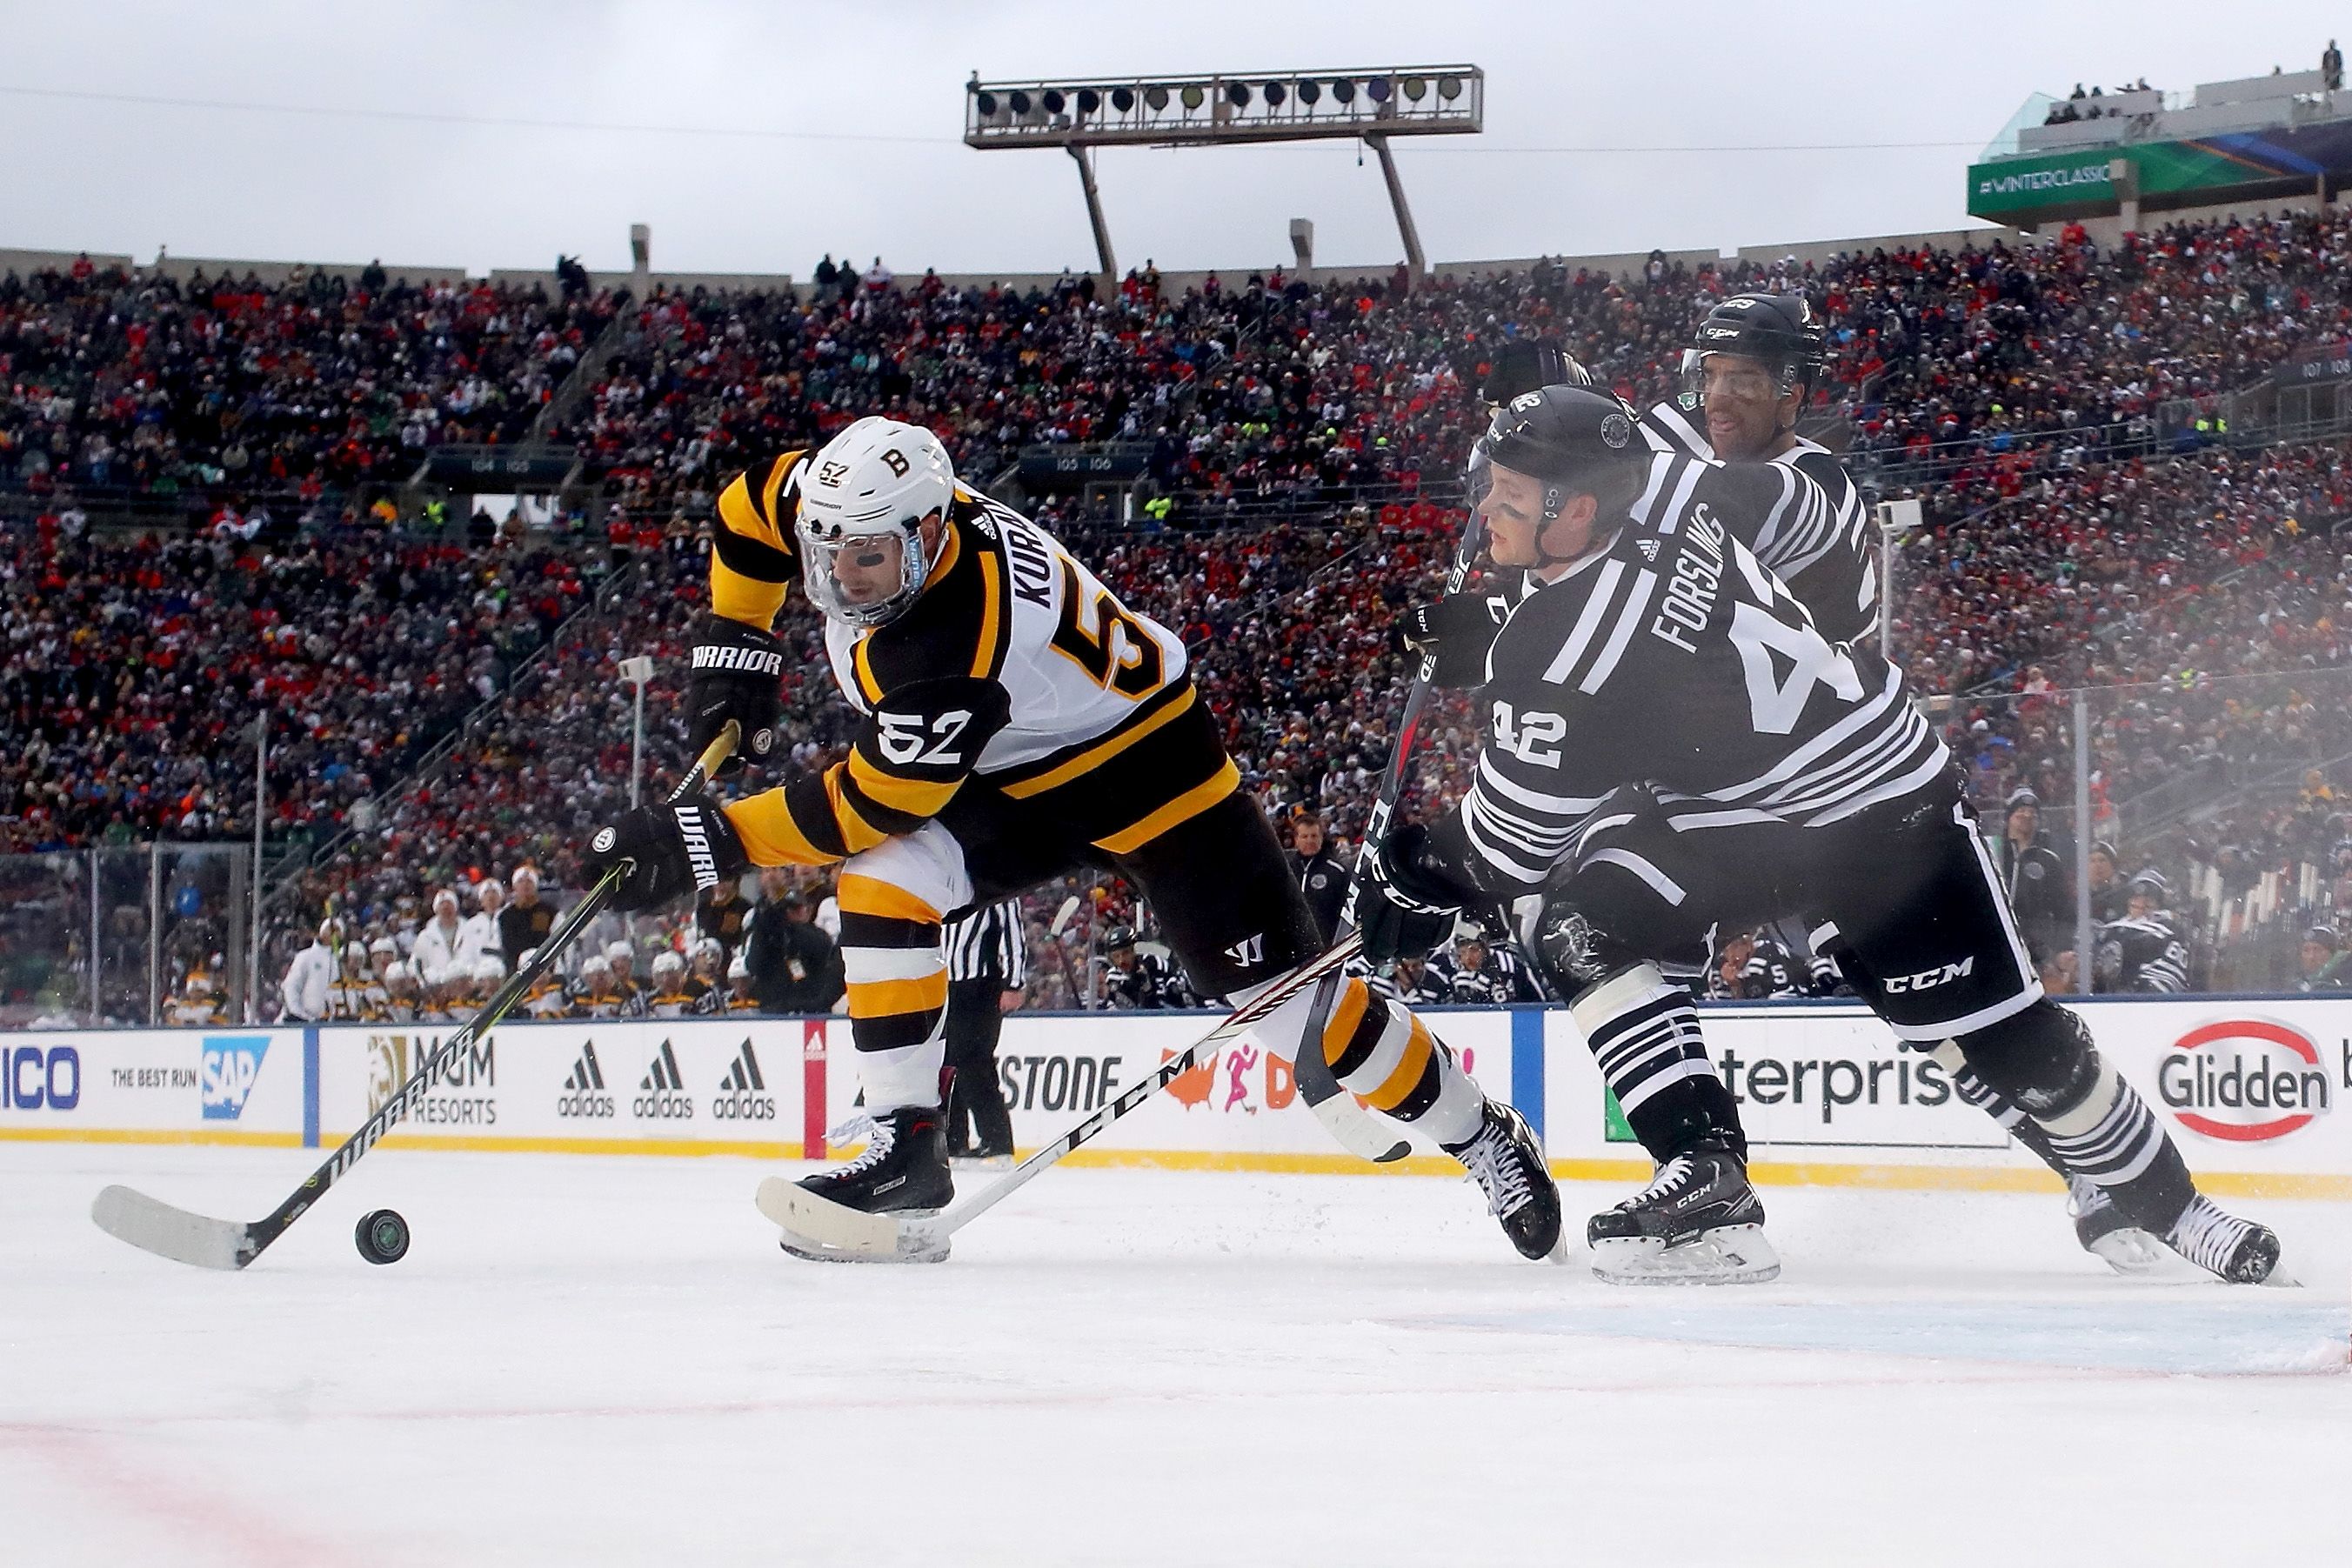 NHL roundup: Bad ice conditions impacting Winter Classic